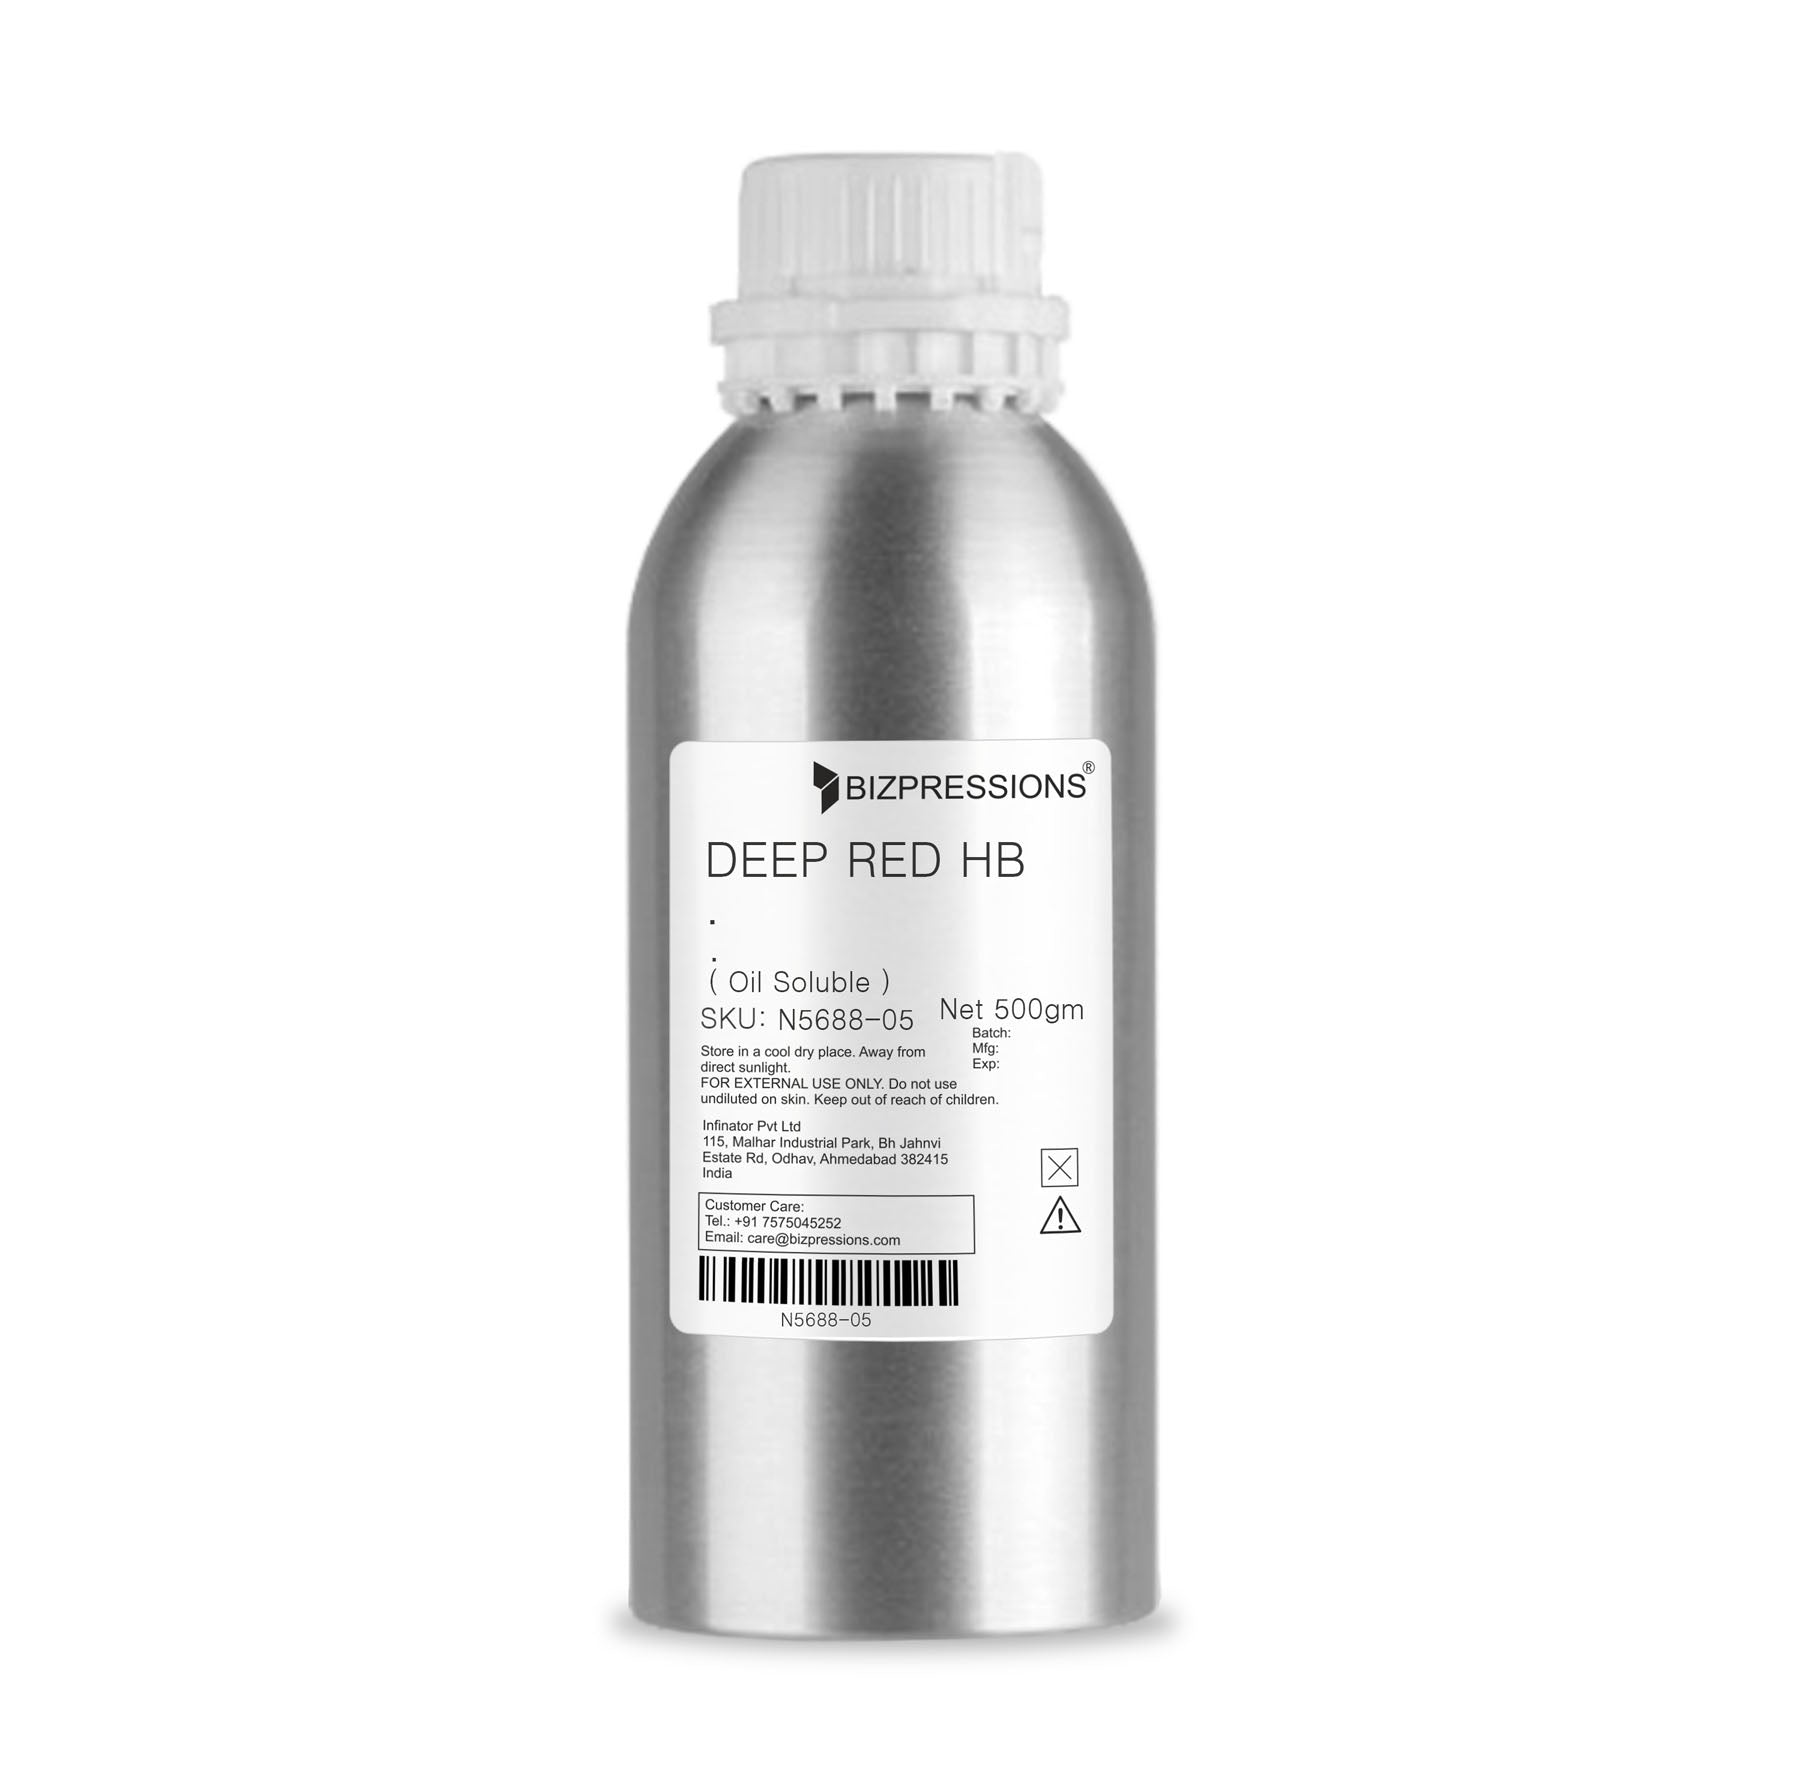 DEEP RED HB - Fragrance ( Oil Soluble )